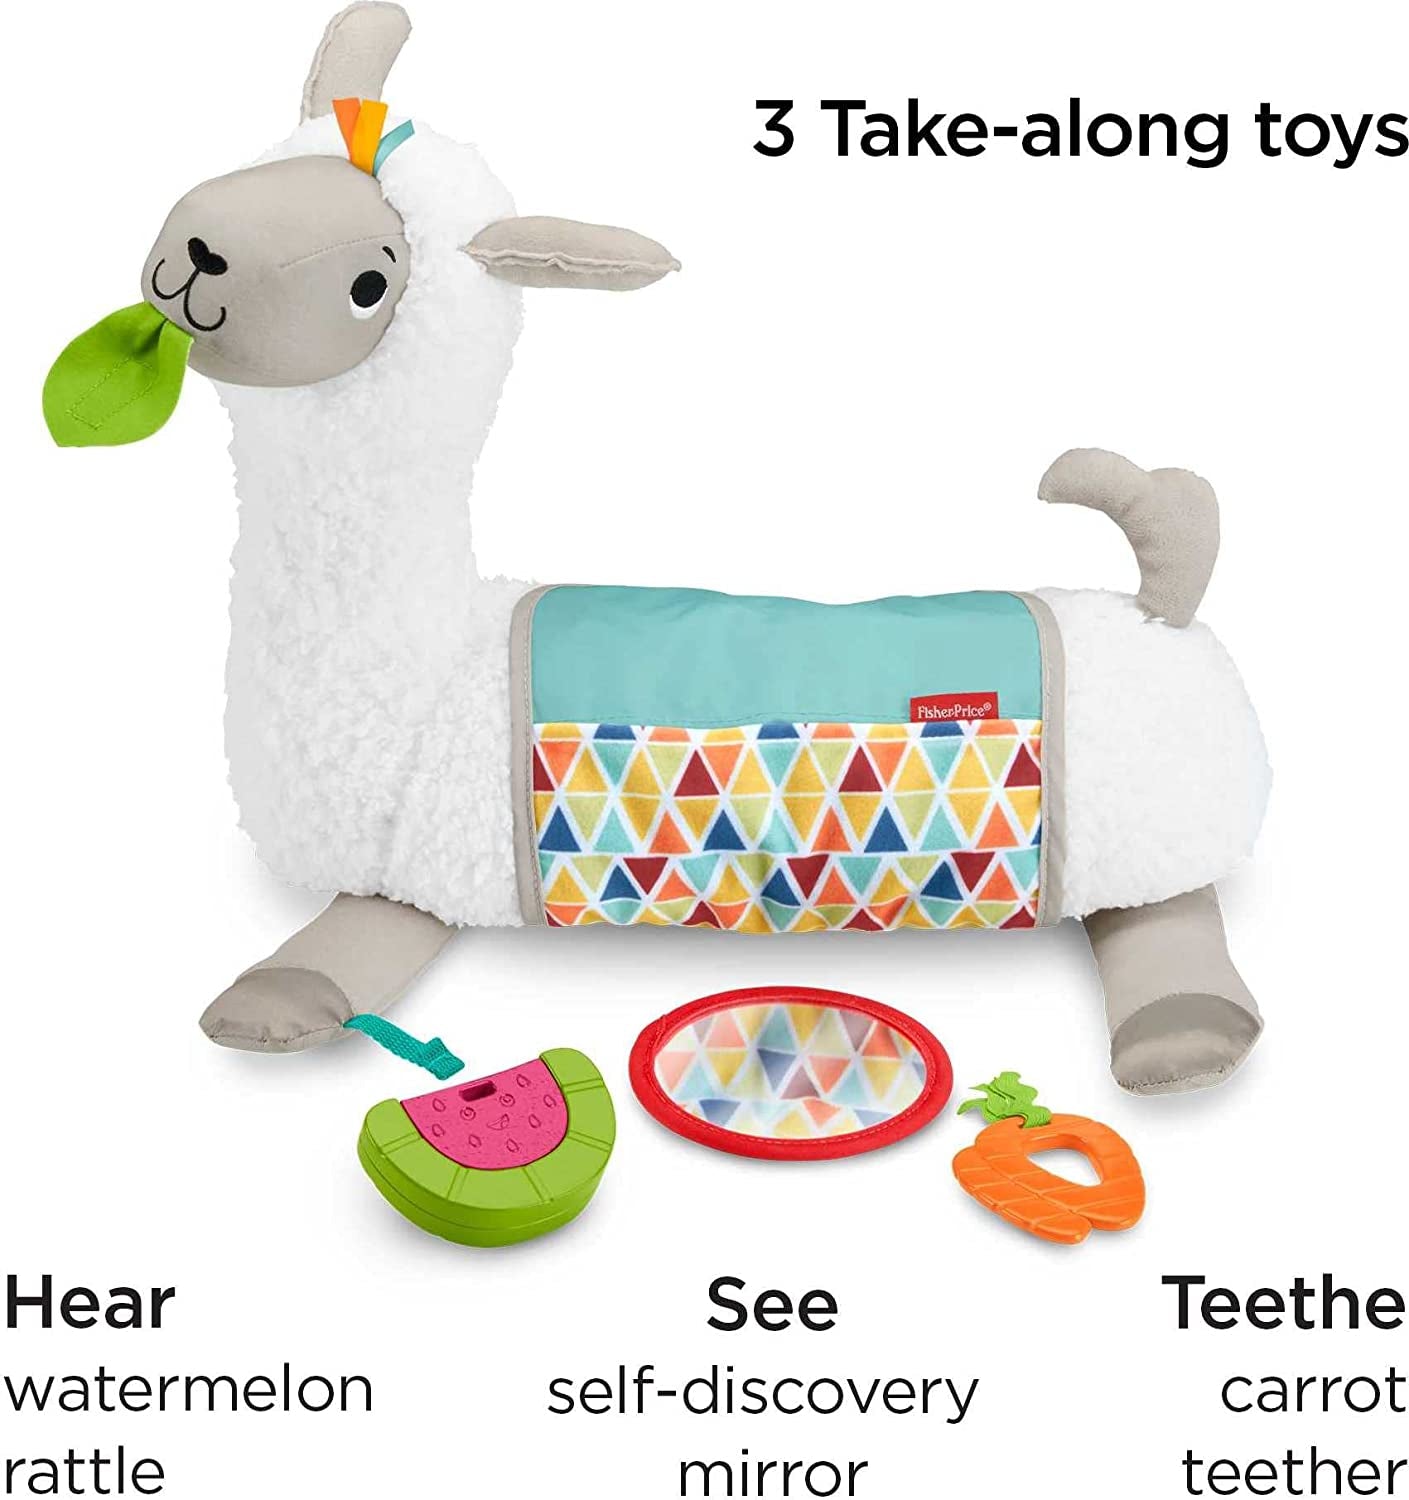 Fisher-Price Grow-with-Me Tummy Time Llama, 4 Ways To Play As Baby Grows, 3 Take-Along Toys, Engages Baby’s Senses Of Sight, Hearing and Touch, GLK39